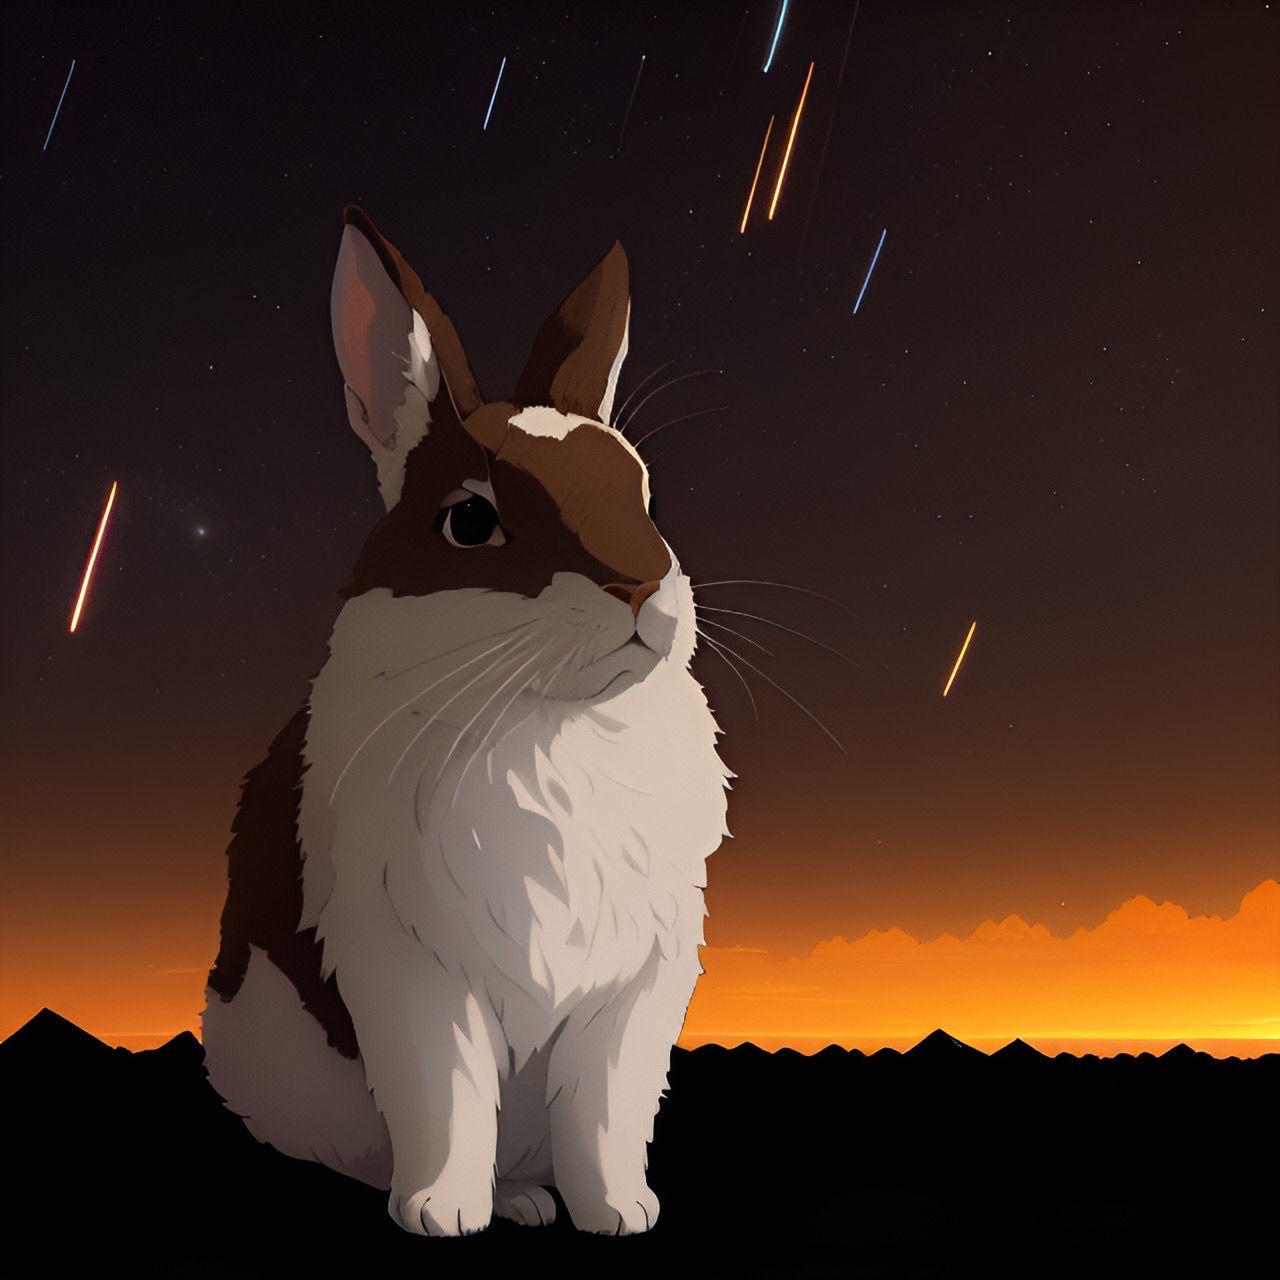 A rabbit watching fire rain from the sky